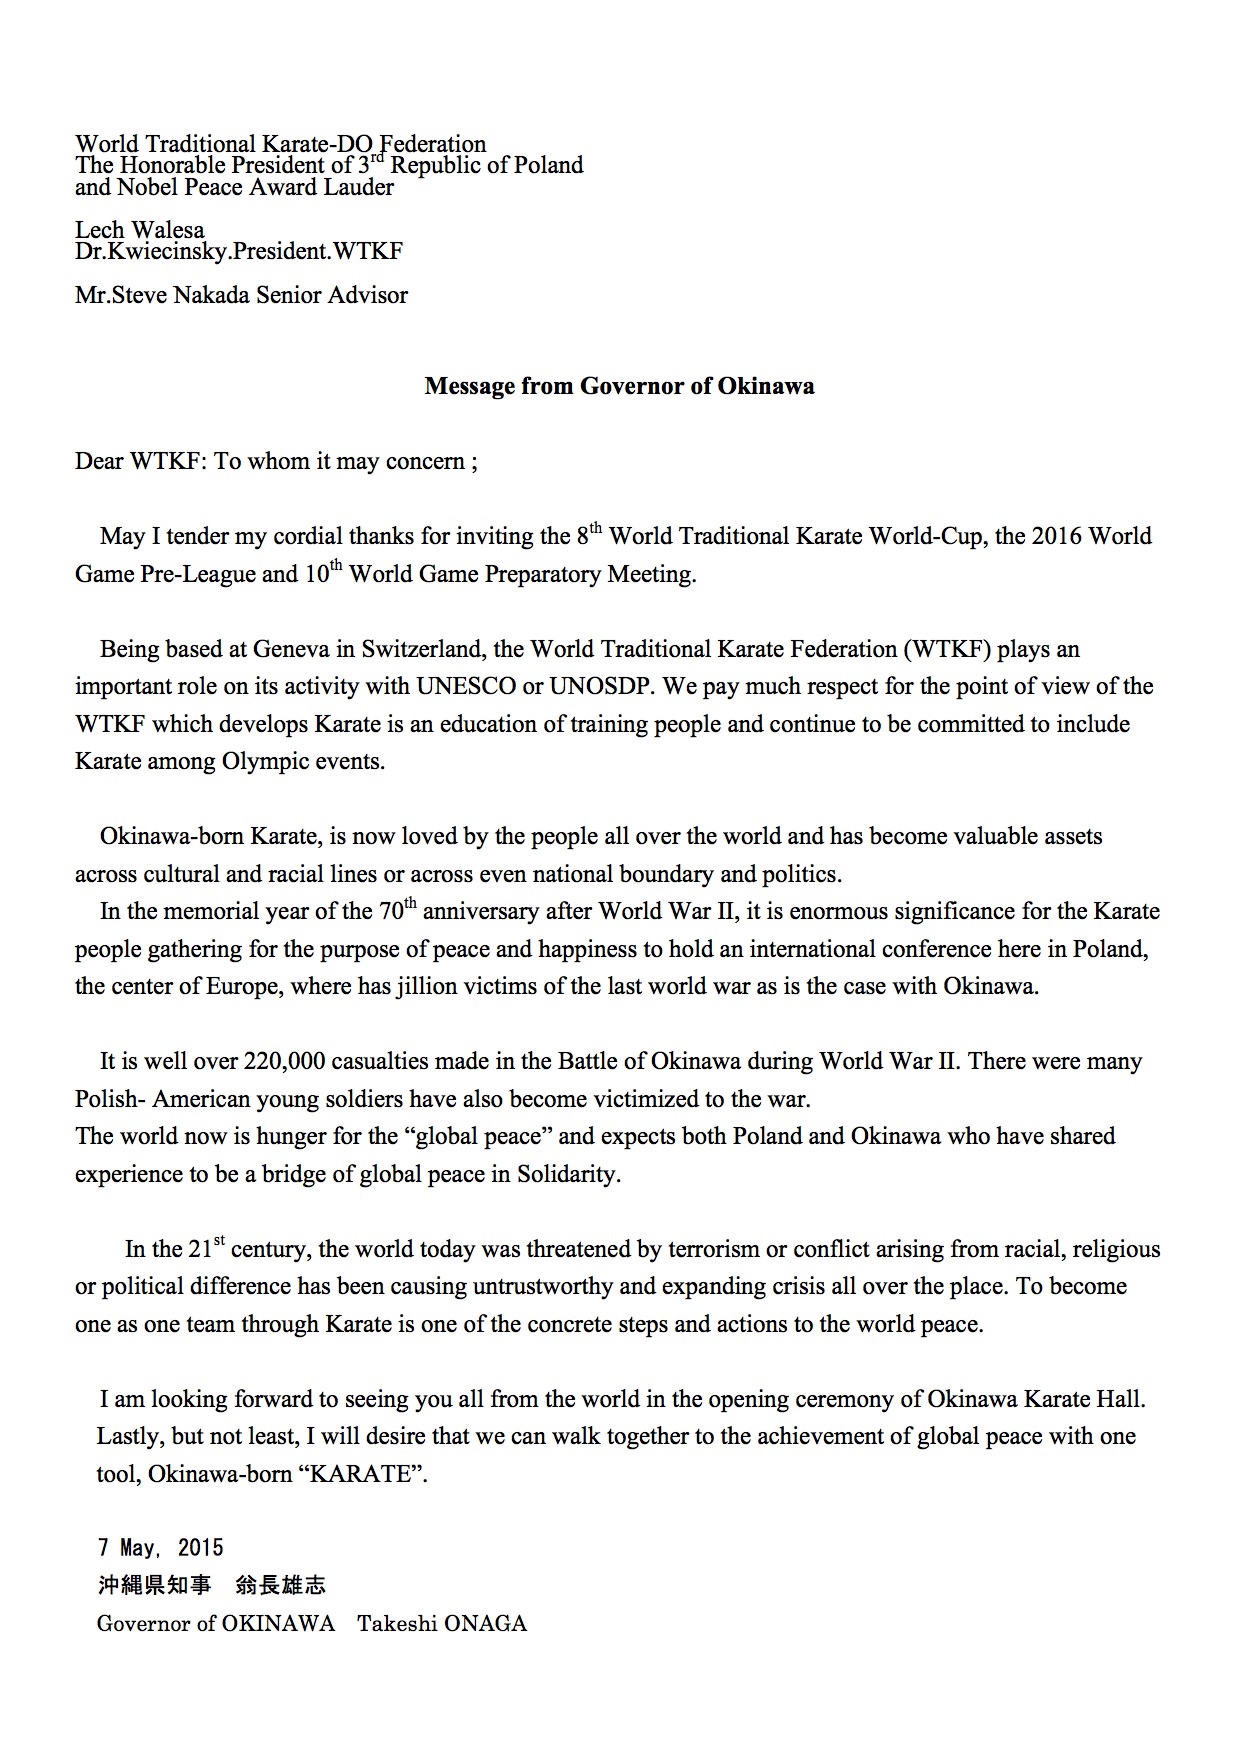 Letter from Governor of Okinawa 5-2015